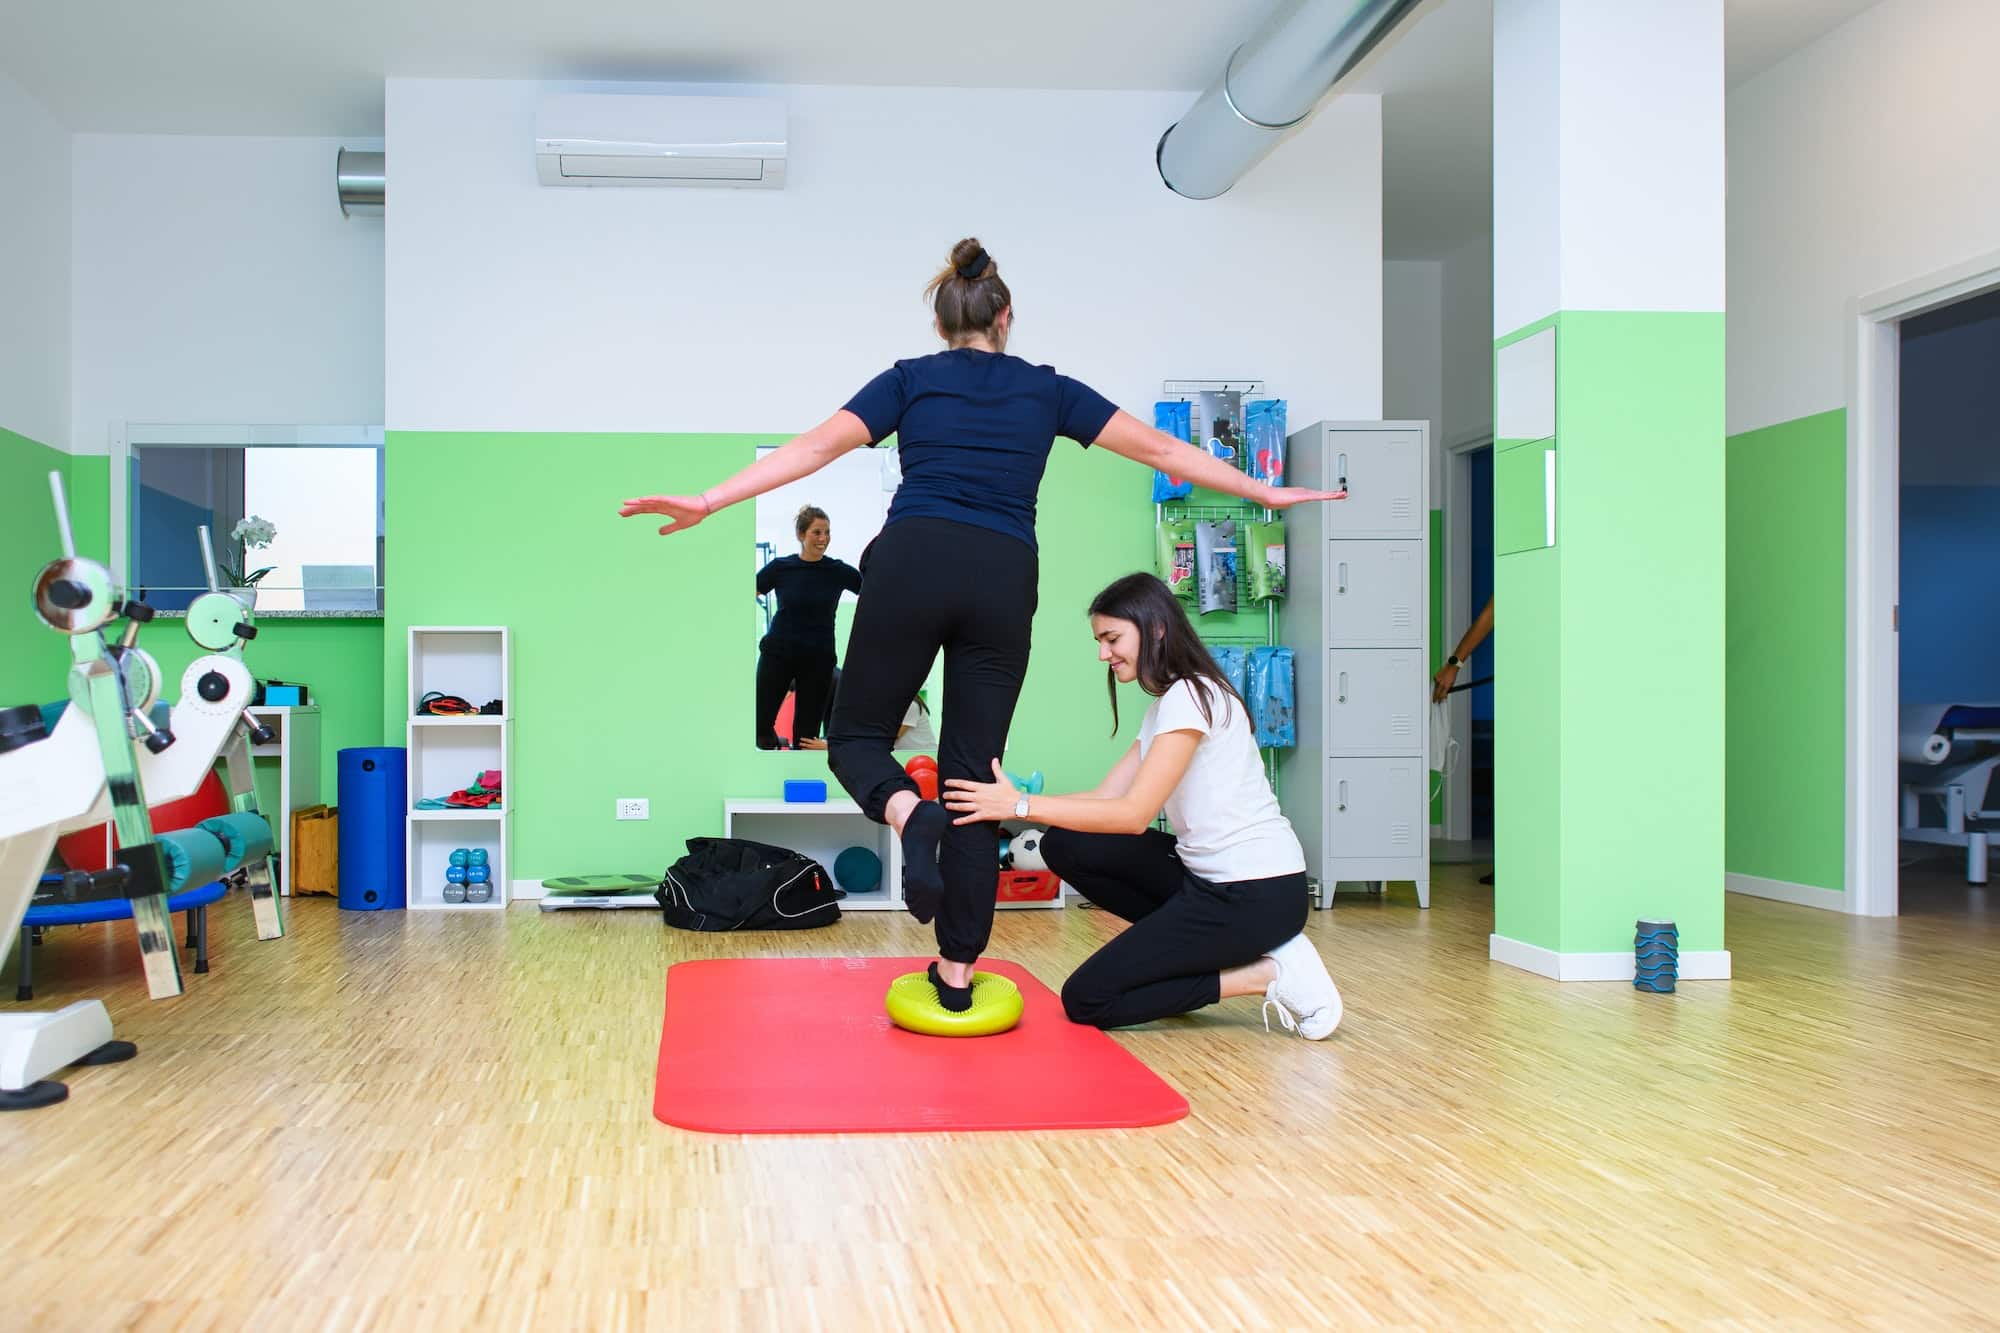 A physiotherapist has a patient perform exercises for ankle proprioception